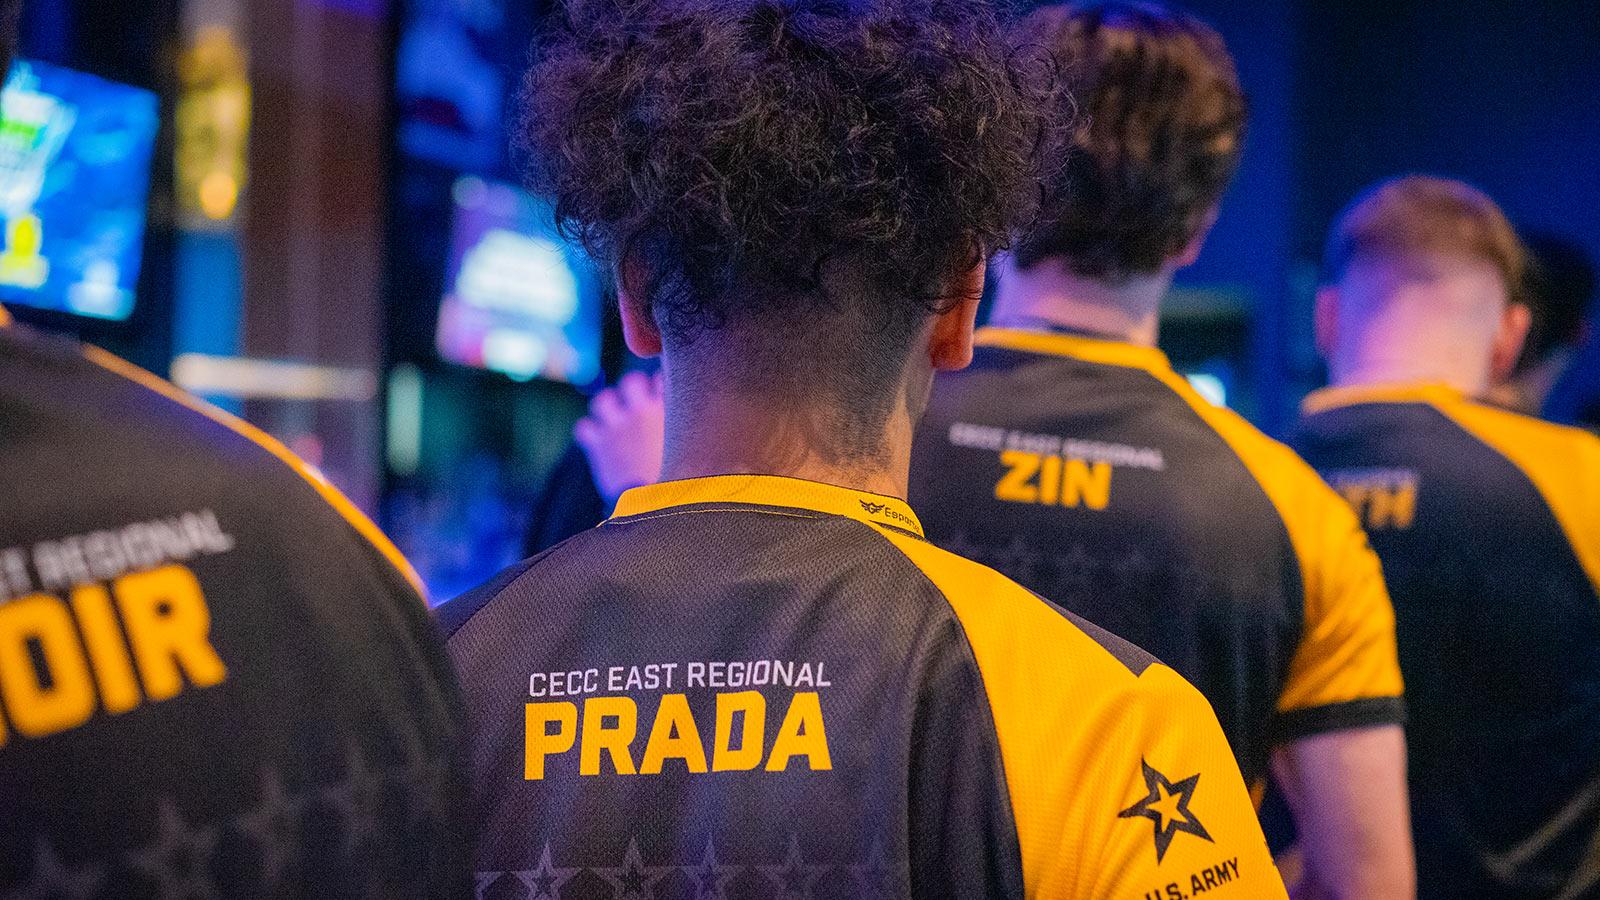 The back of an Esports player's jersey bears the name Prada